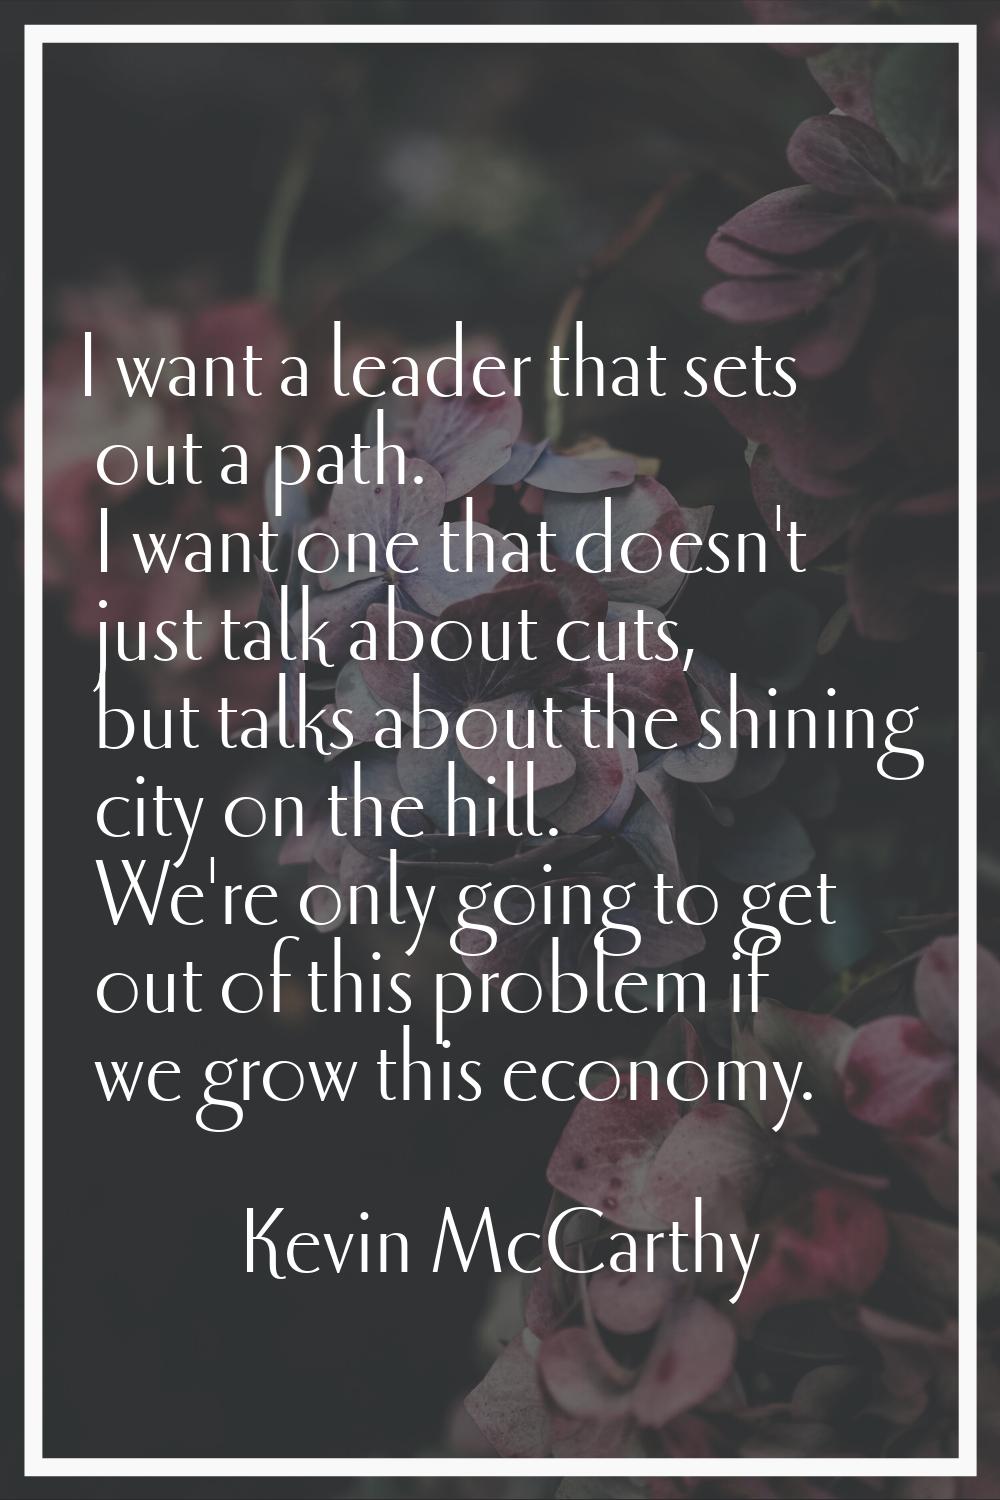 I want a leader that sets out a path. I want one that doesn't just talk about cuts, but talks about